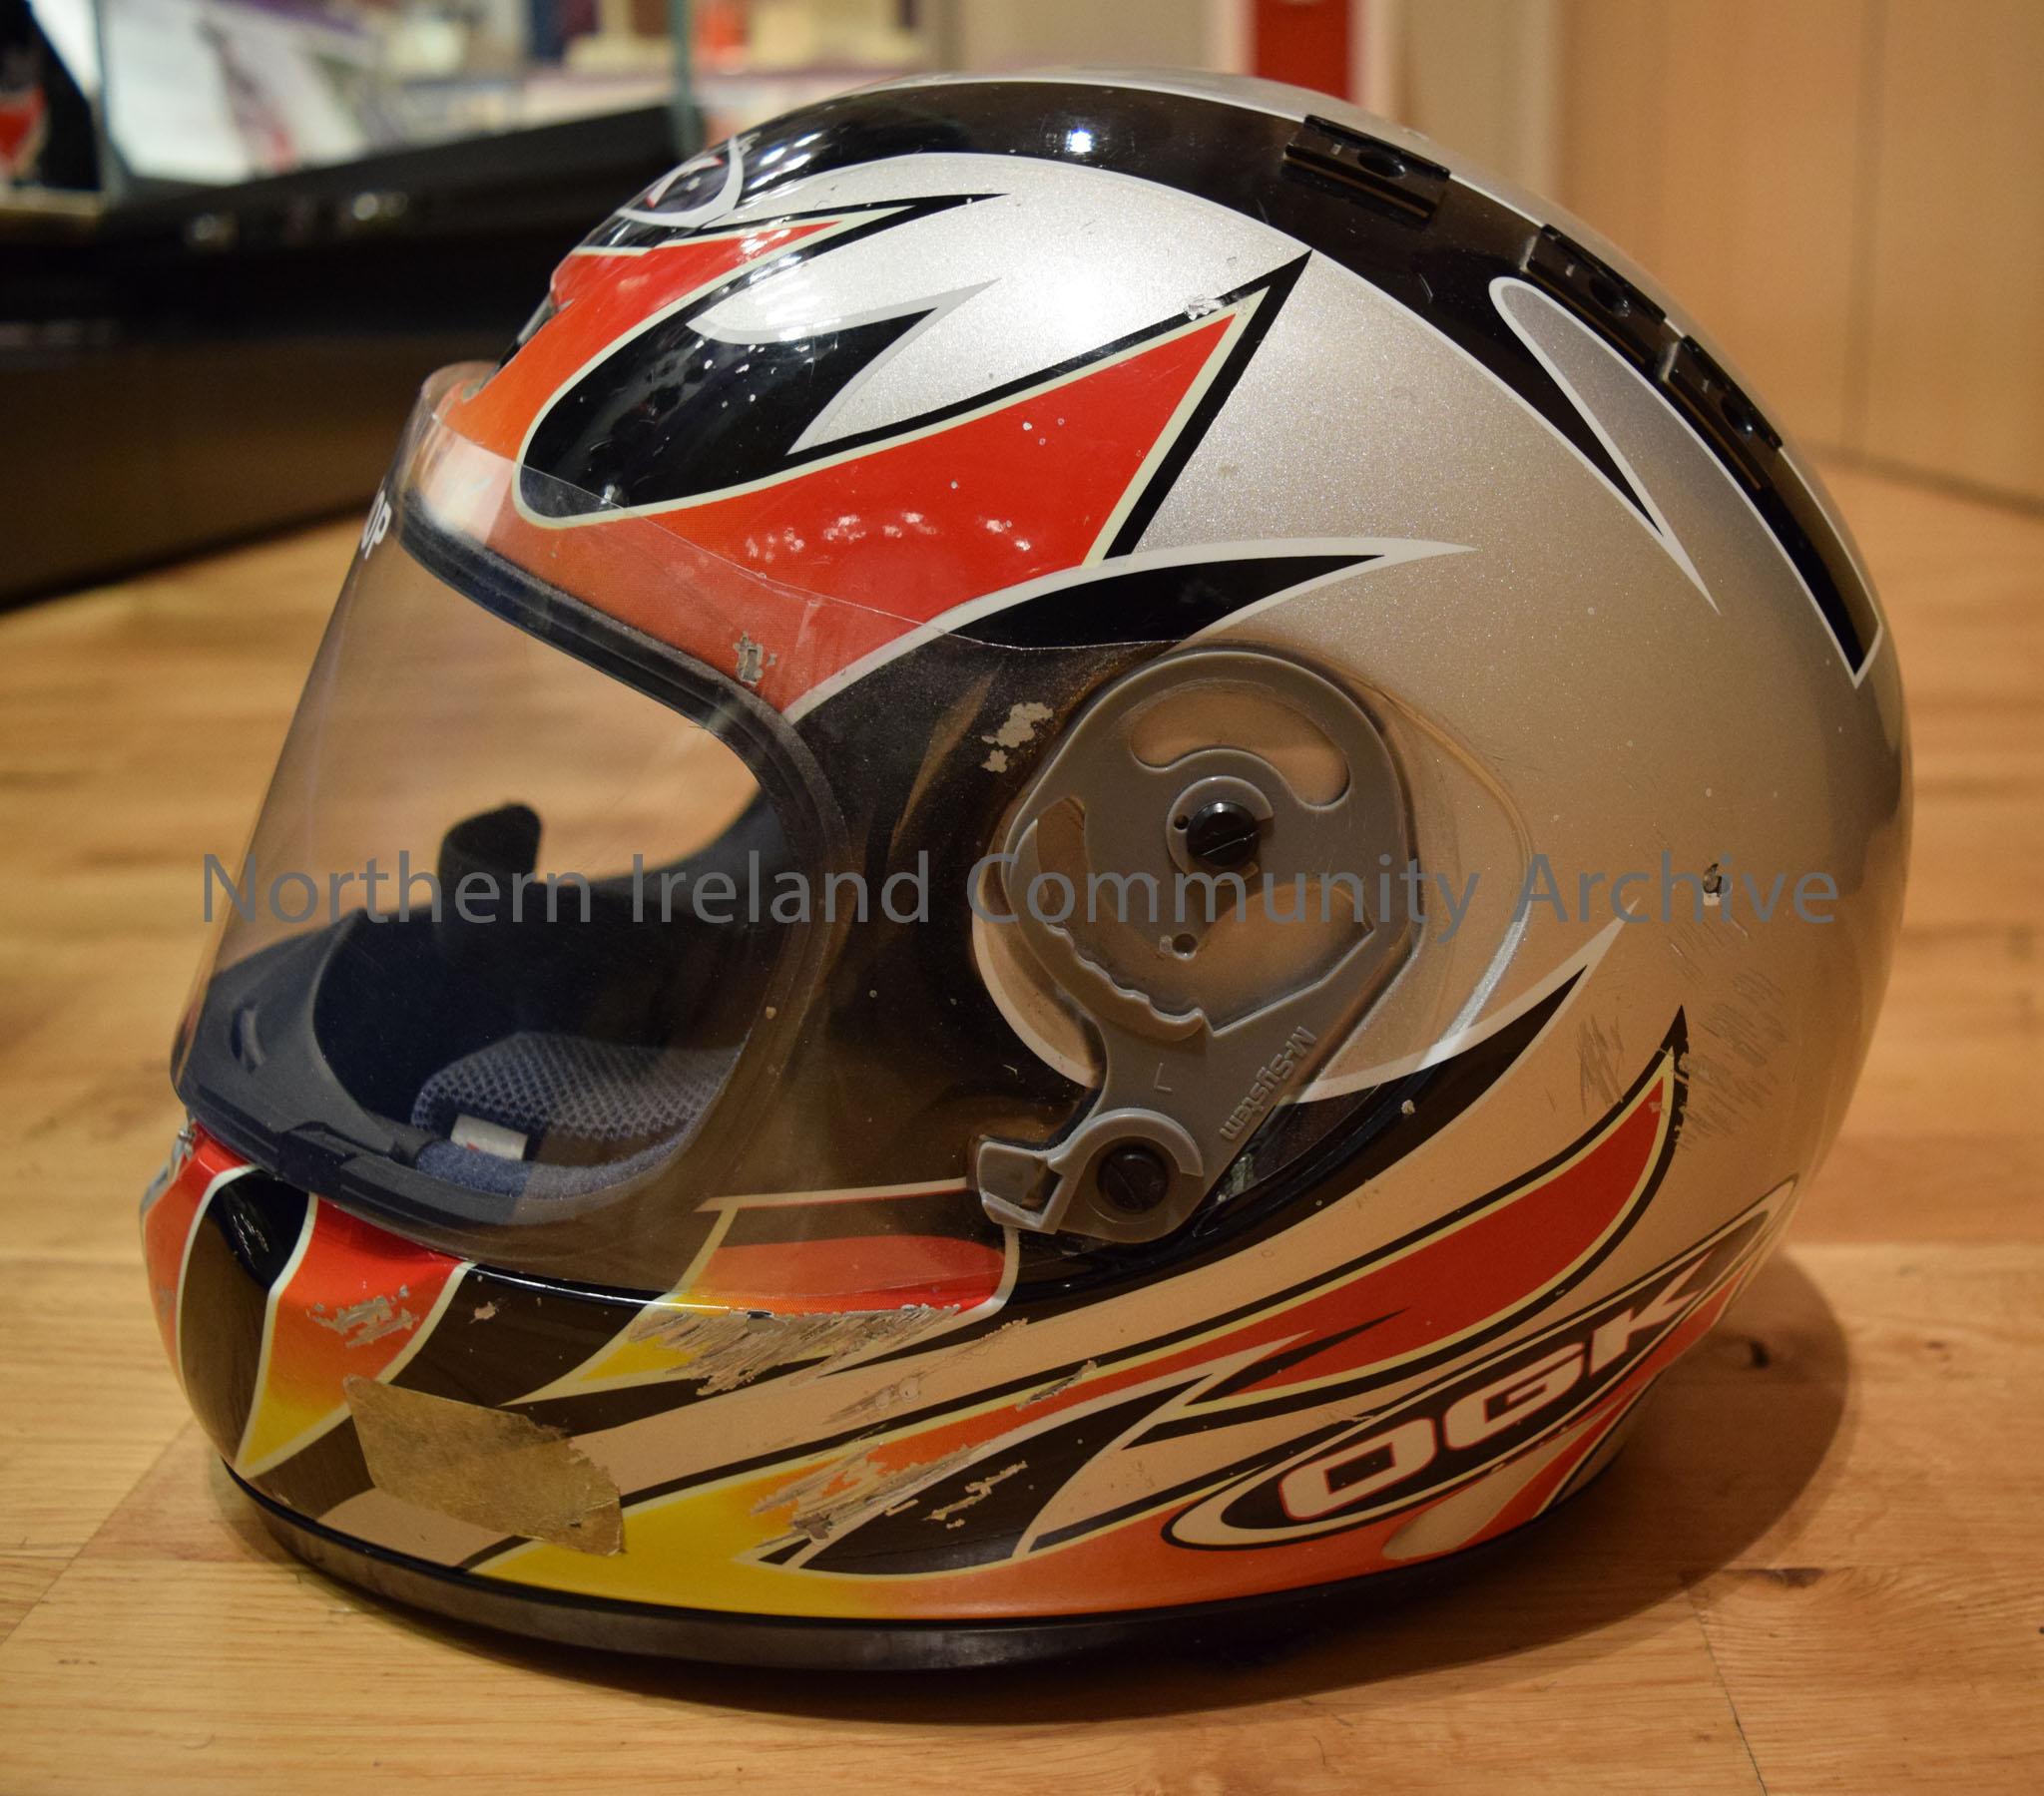 OGK motorcycle helmet belonging to Sam Dunlop. Grey helmet with black stripes and red and orange flame effects on the side and a red and orange curved… – 2016.114 (3)